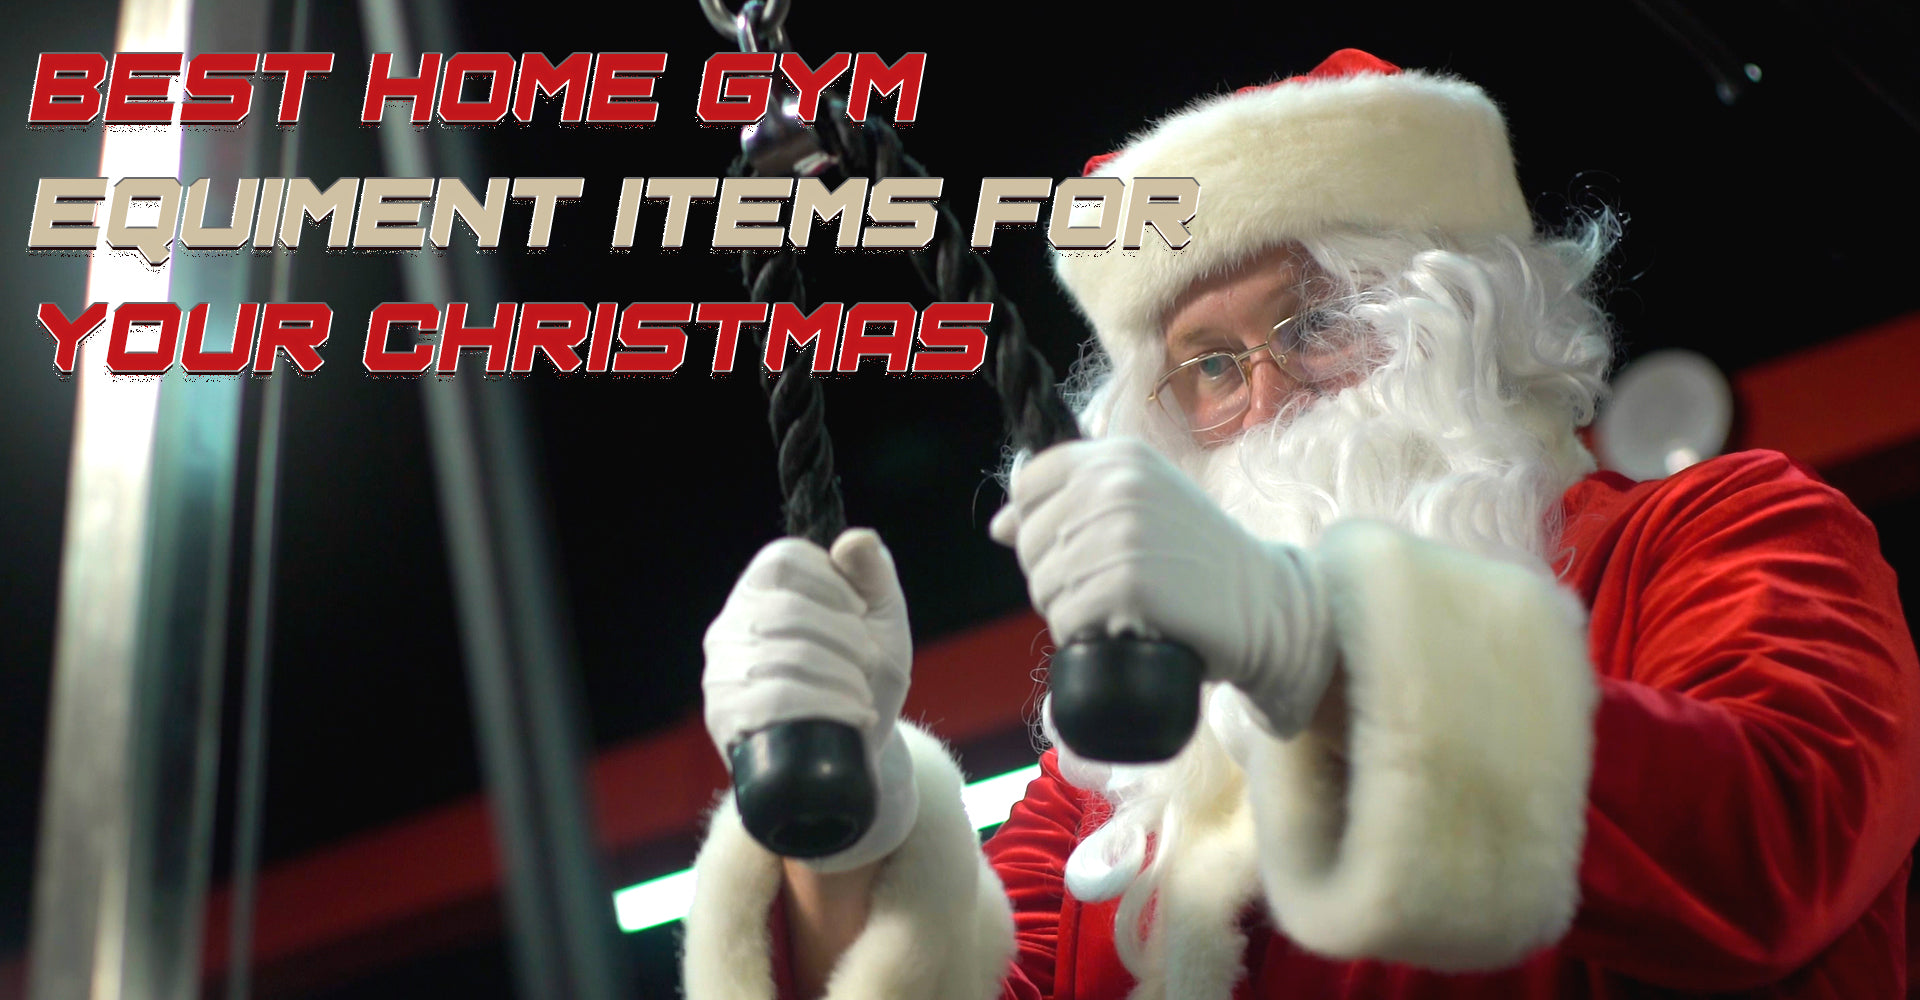 Best Home Gym Equiment Items for Your Christmas